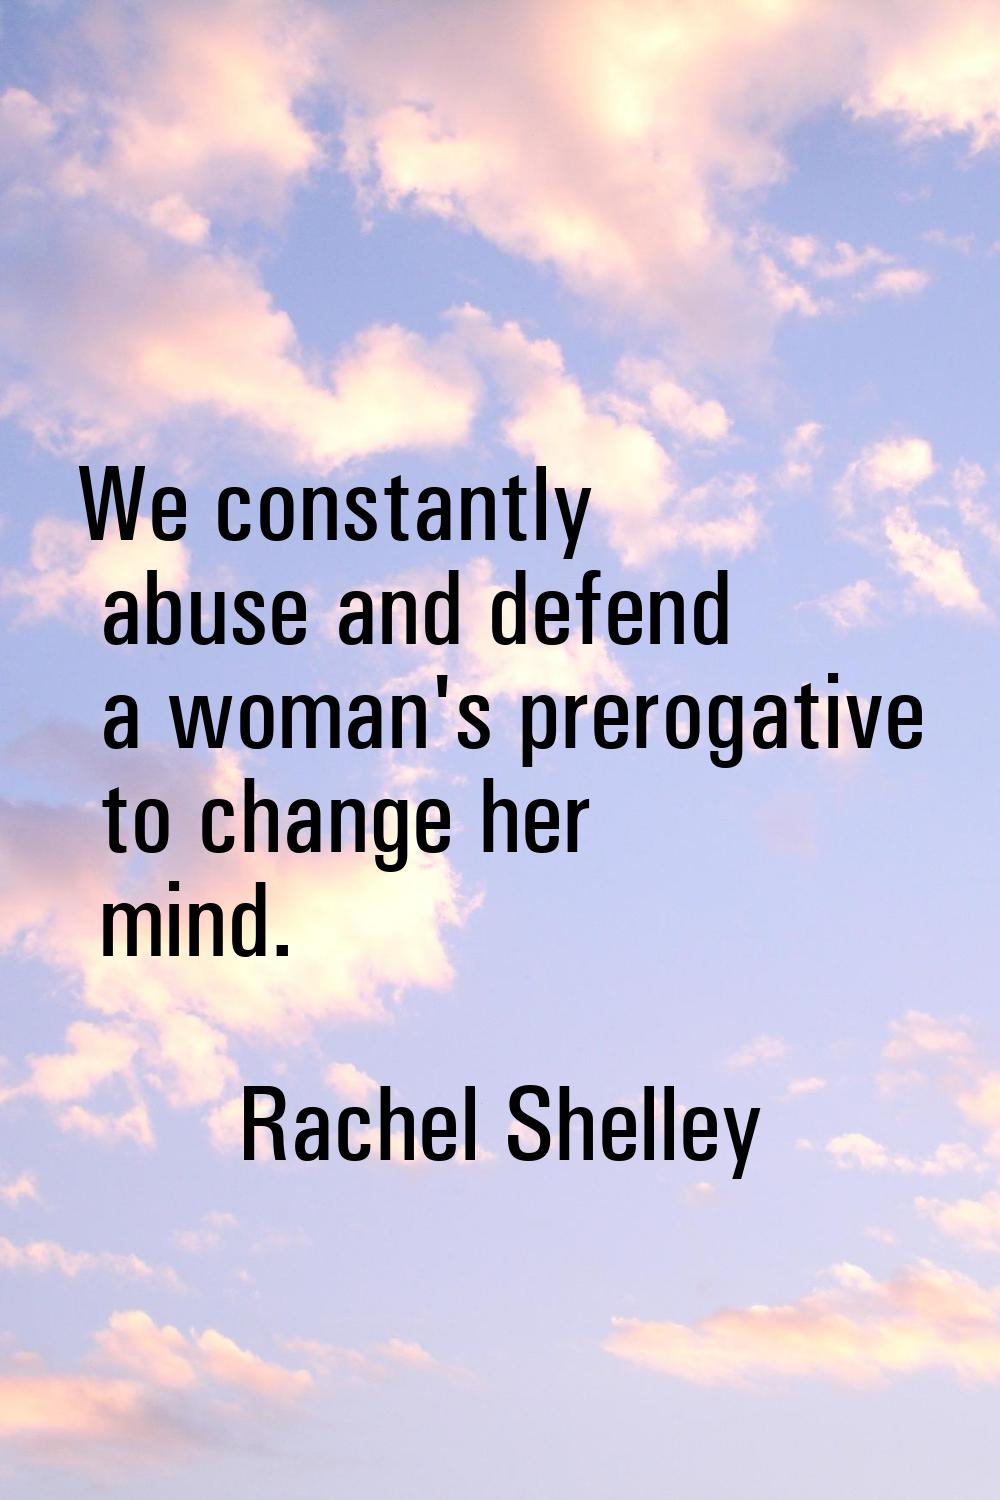 We constantly abuse and defend a woman's prerogative to change her mind.